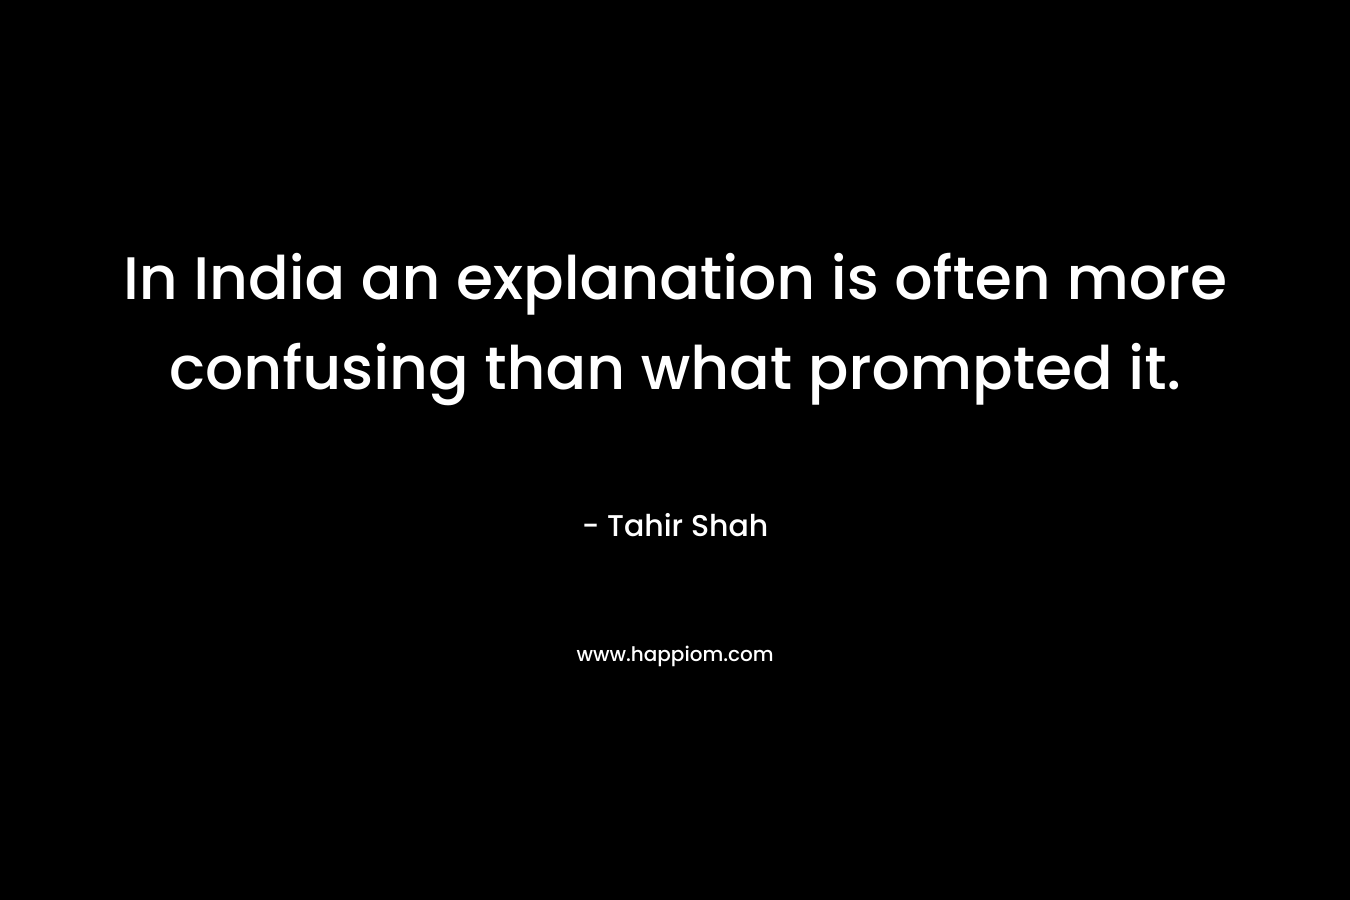 In India an explanation is often more confusing than what prompted it. – Tahir Shah